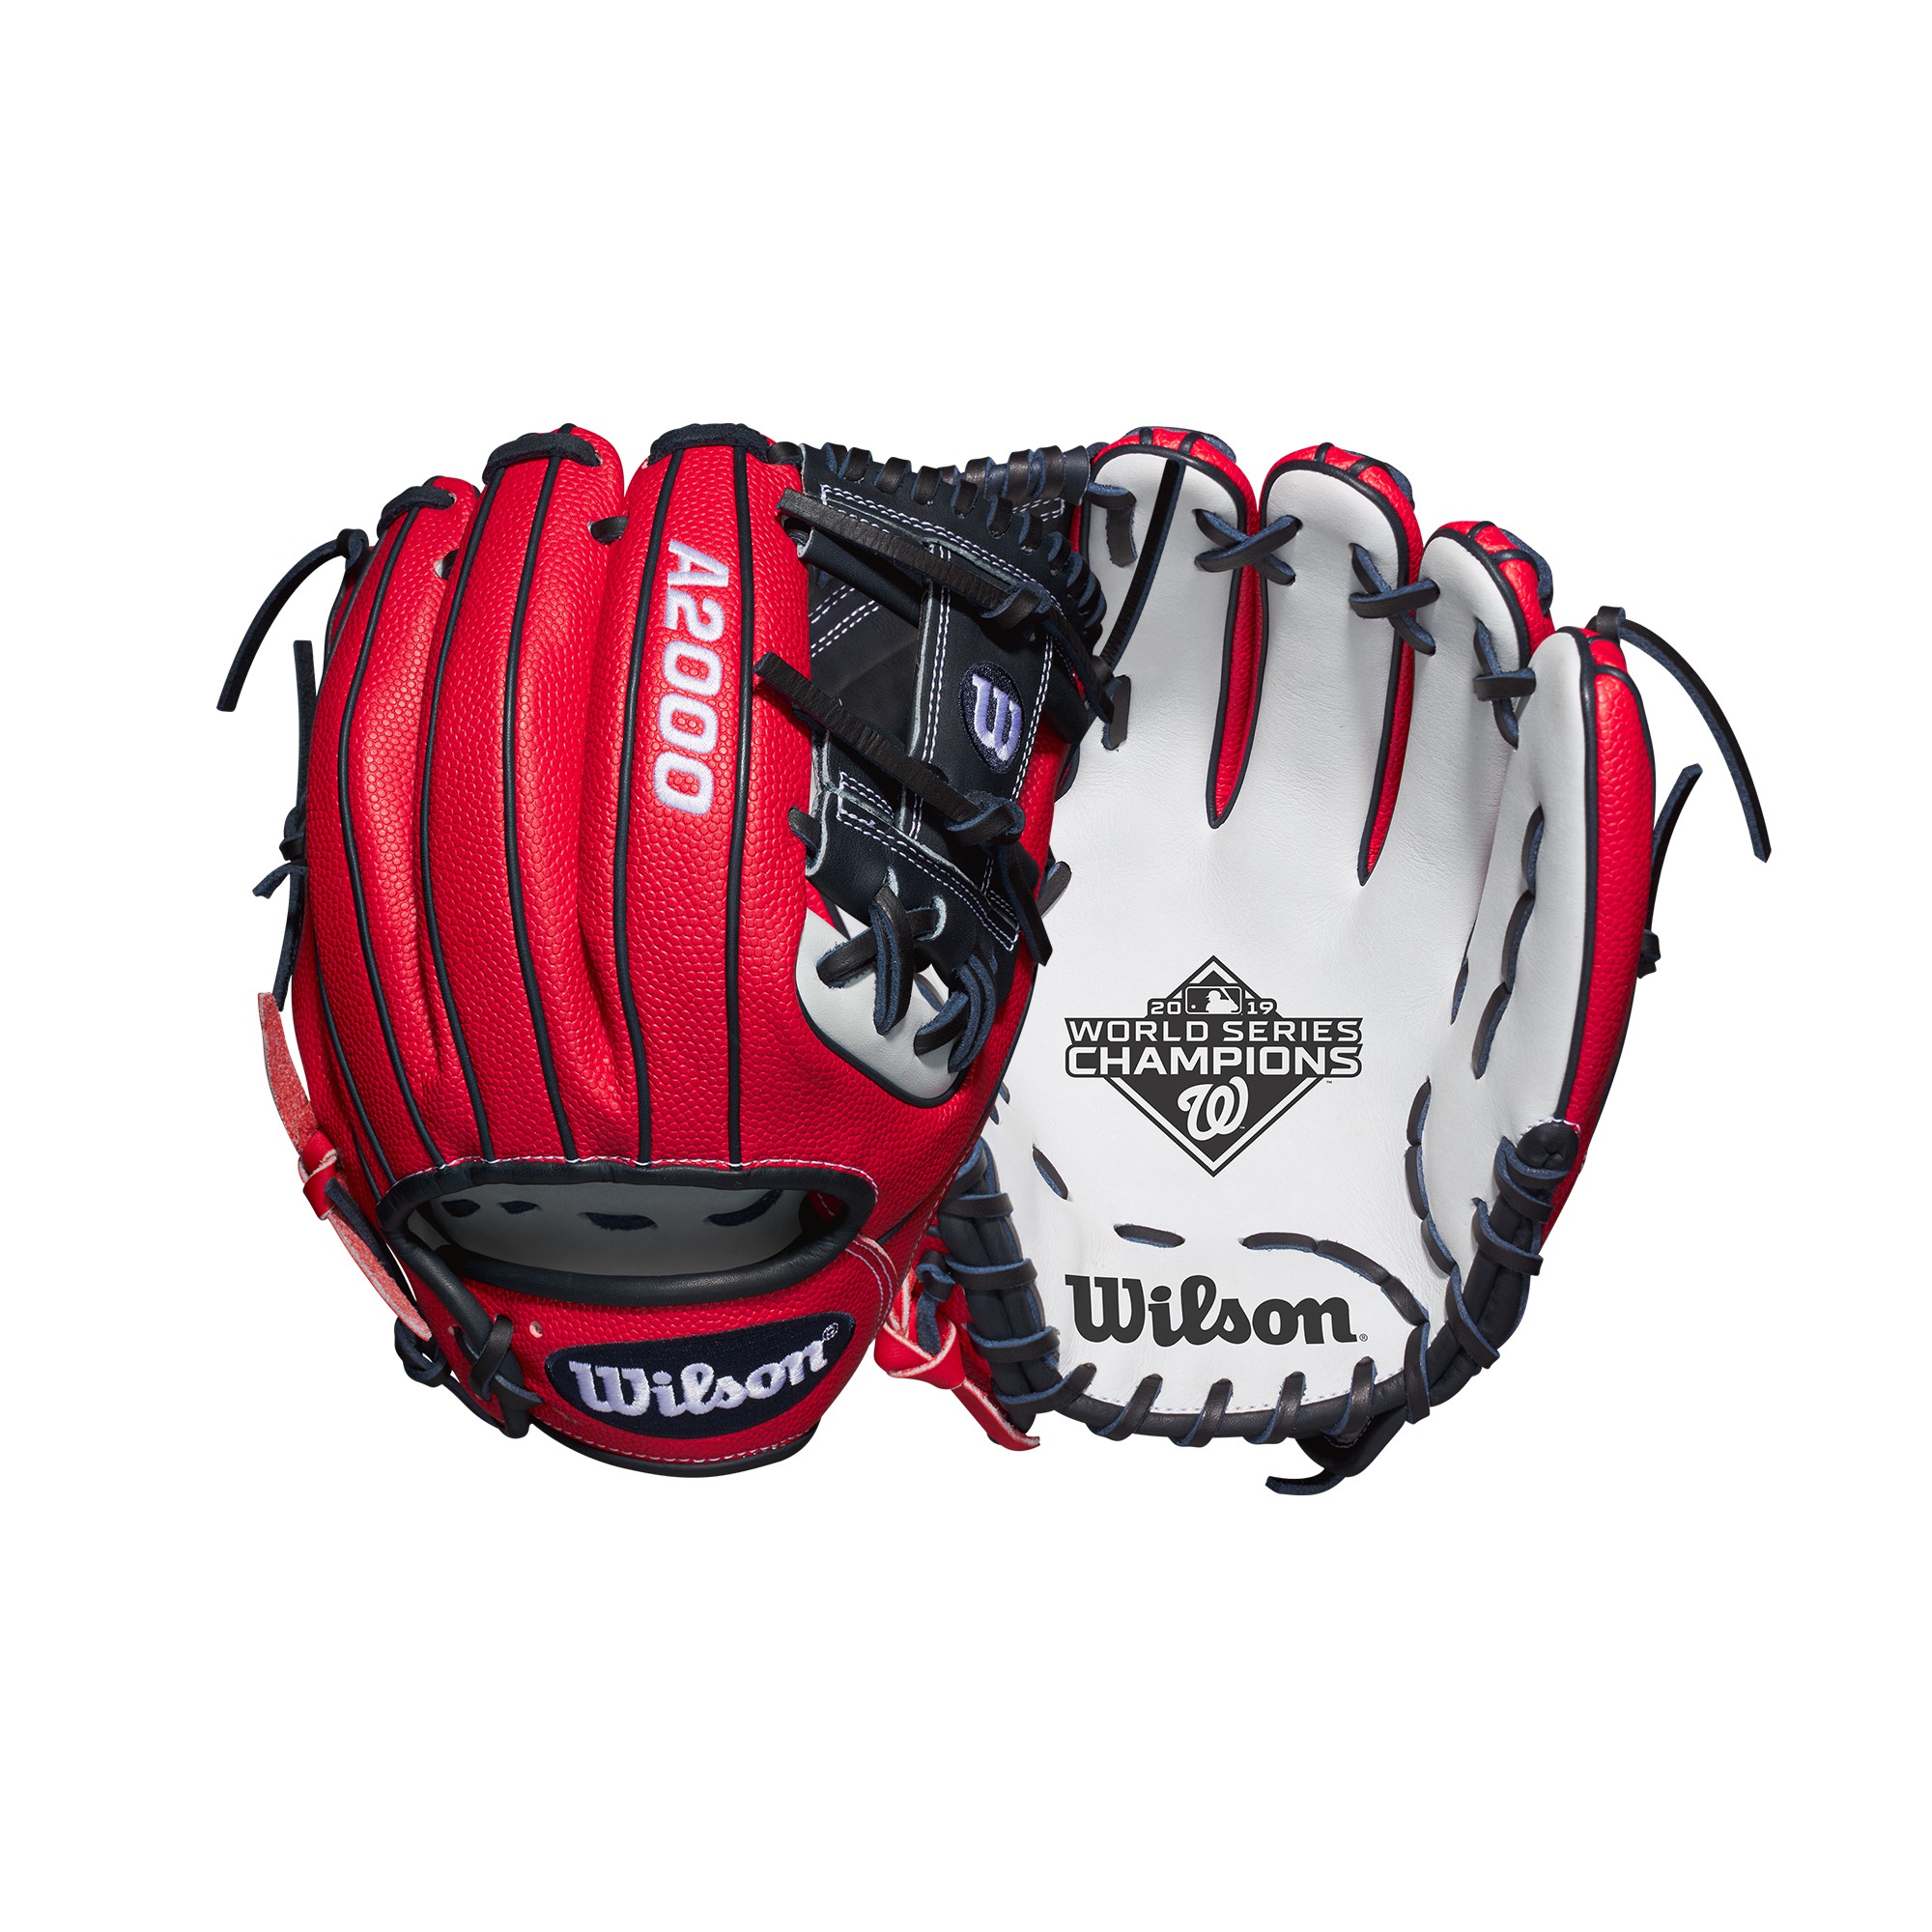 Limited-edition Washington Nations Wilson glove. Available on Wilson.com for $279.95.